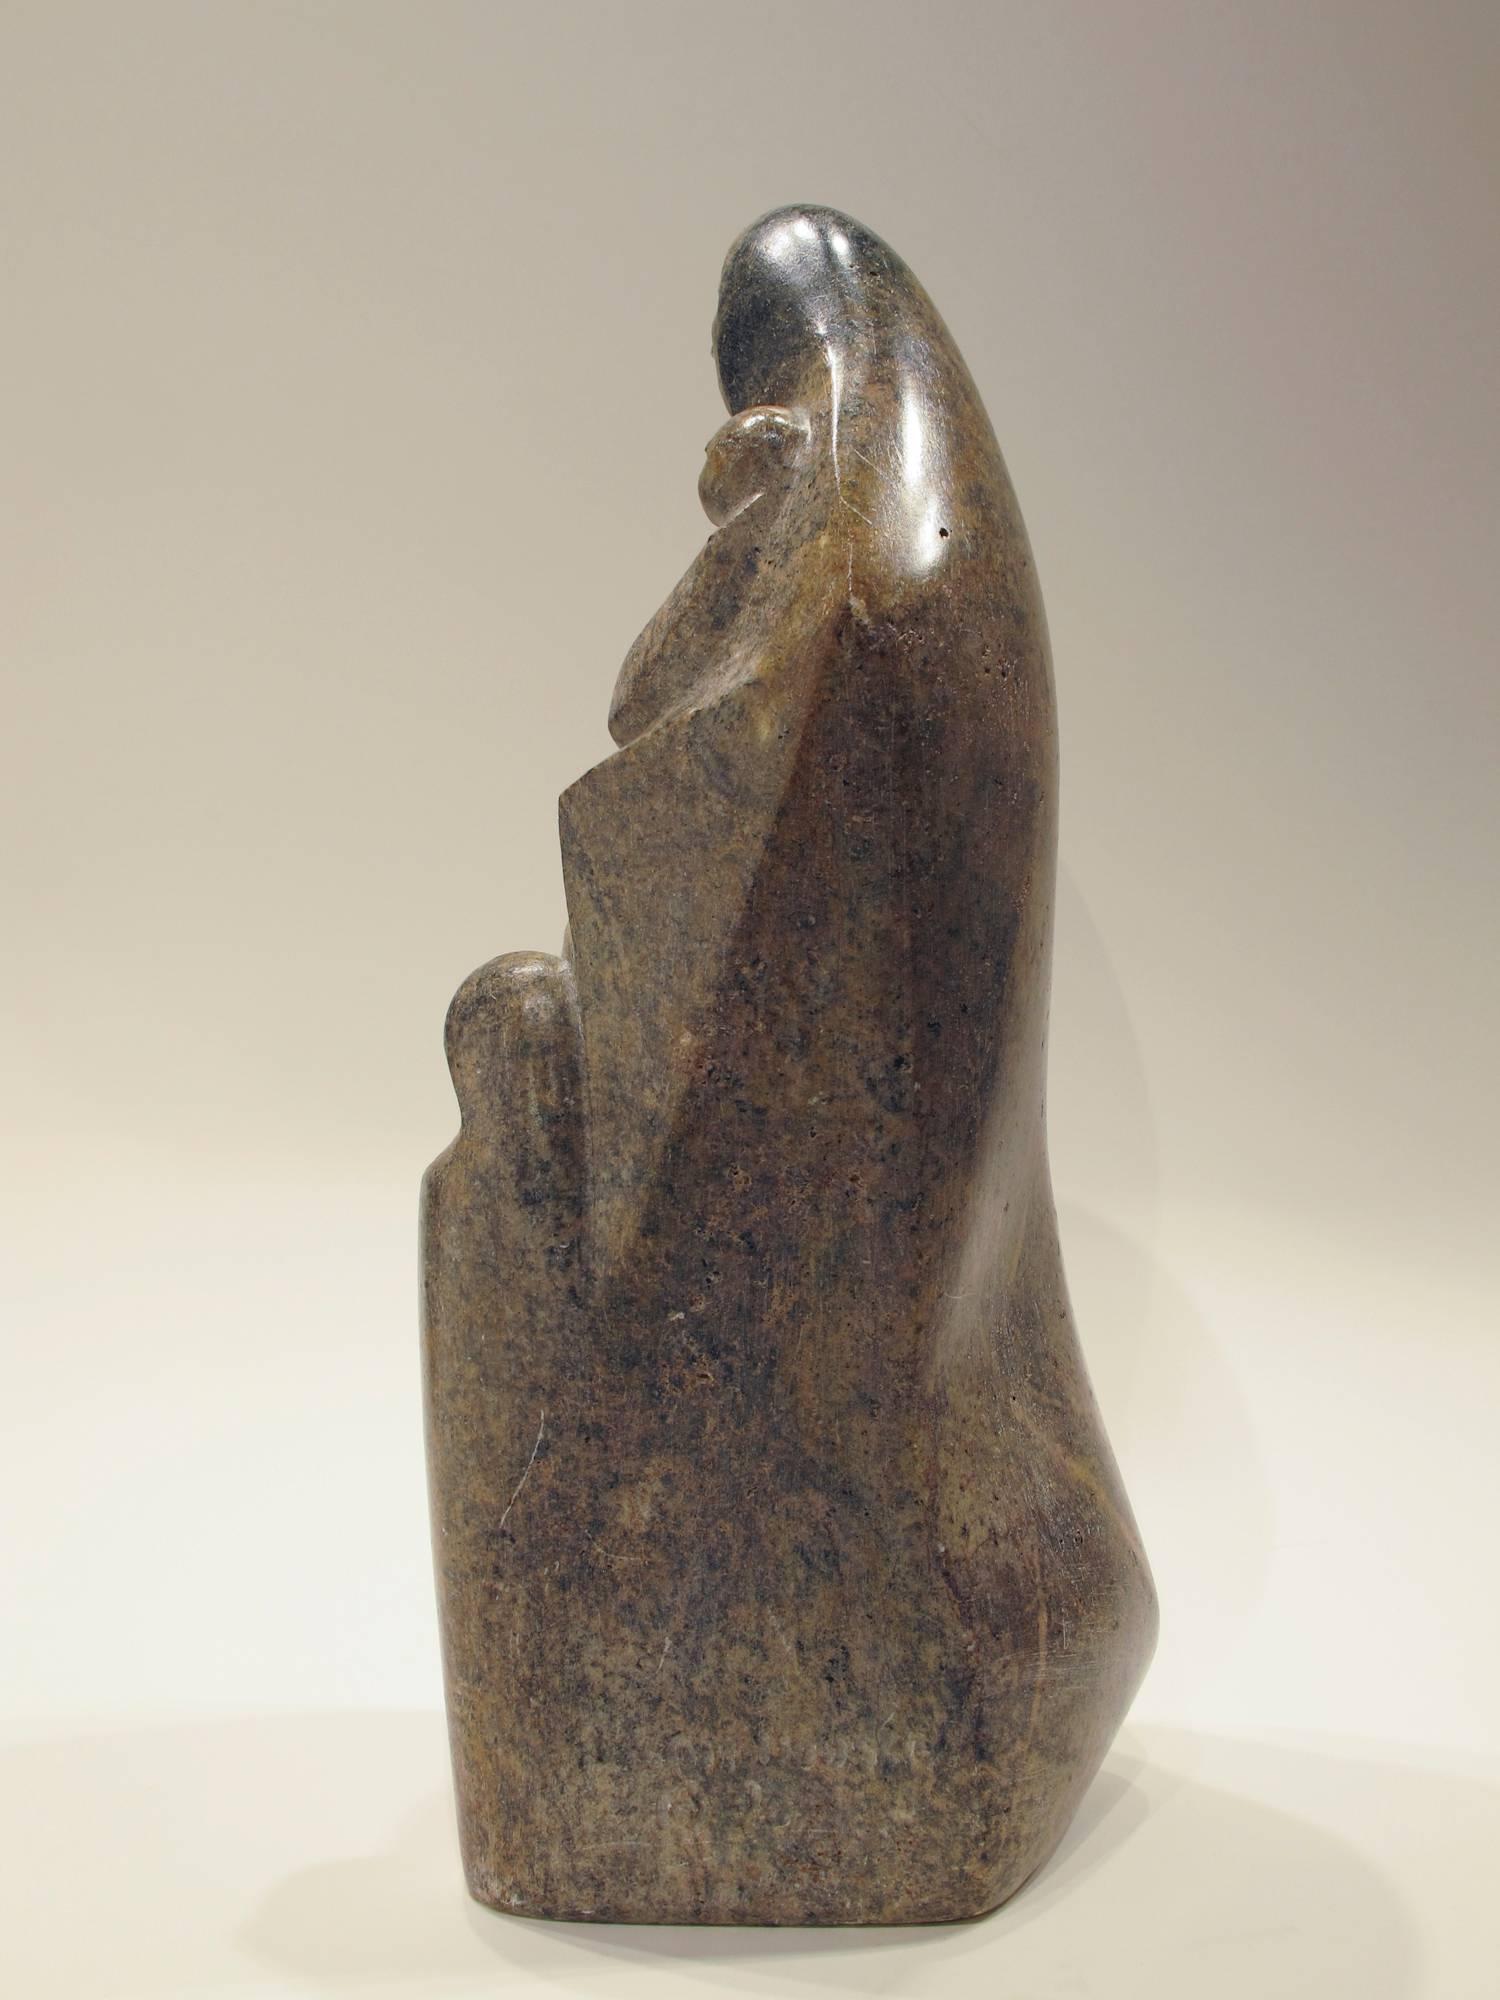 Shared Dreams, stone, sculpture, by Allan Houser, Texas steatite, mother, child 1